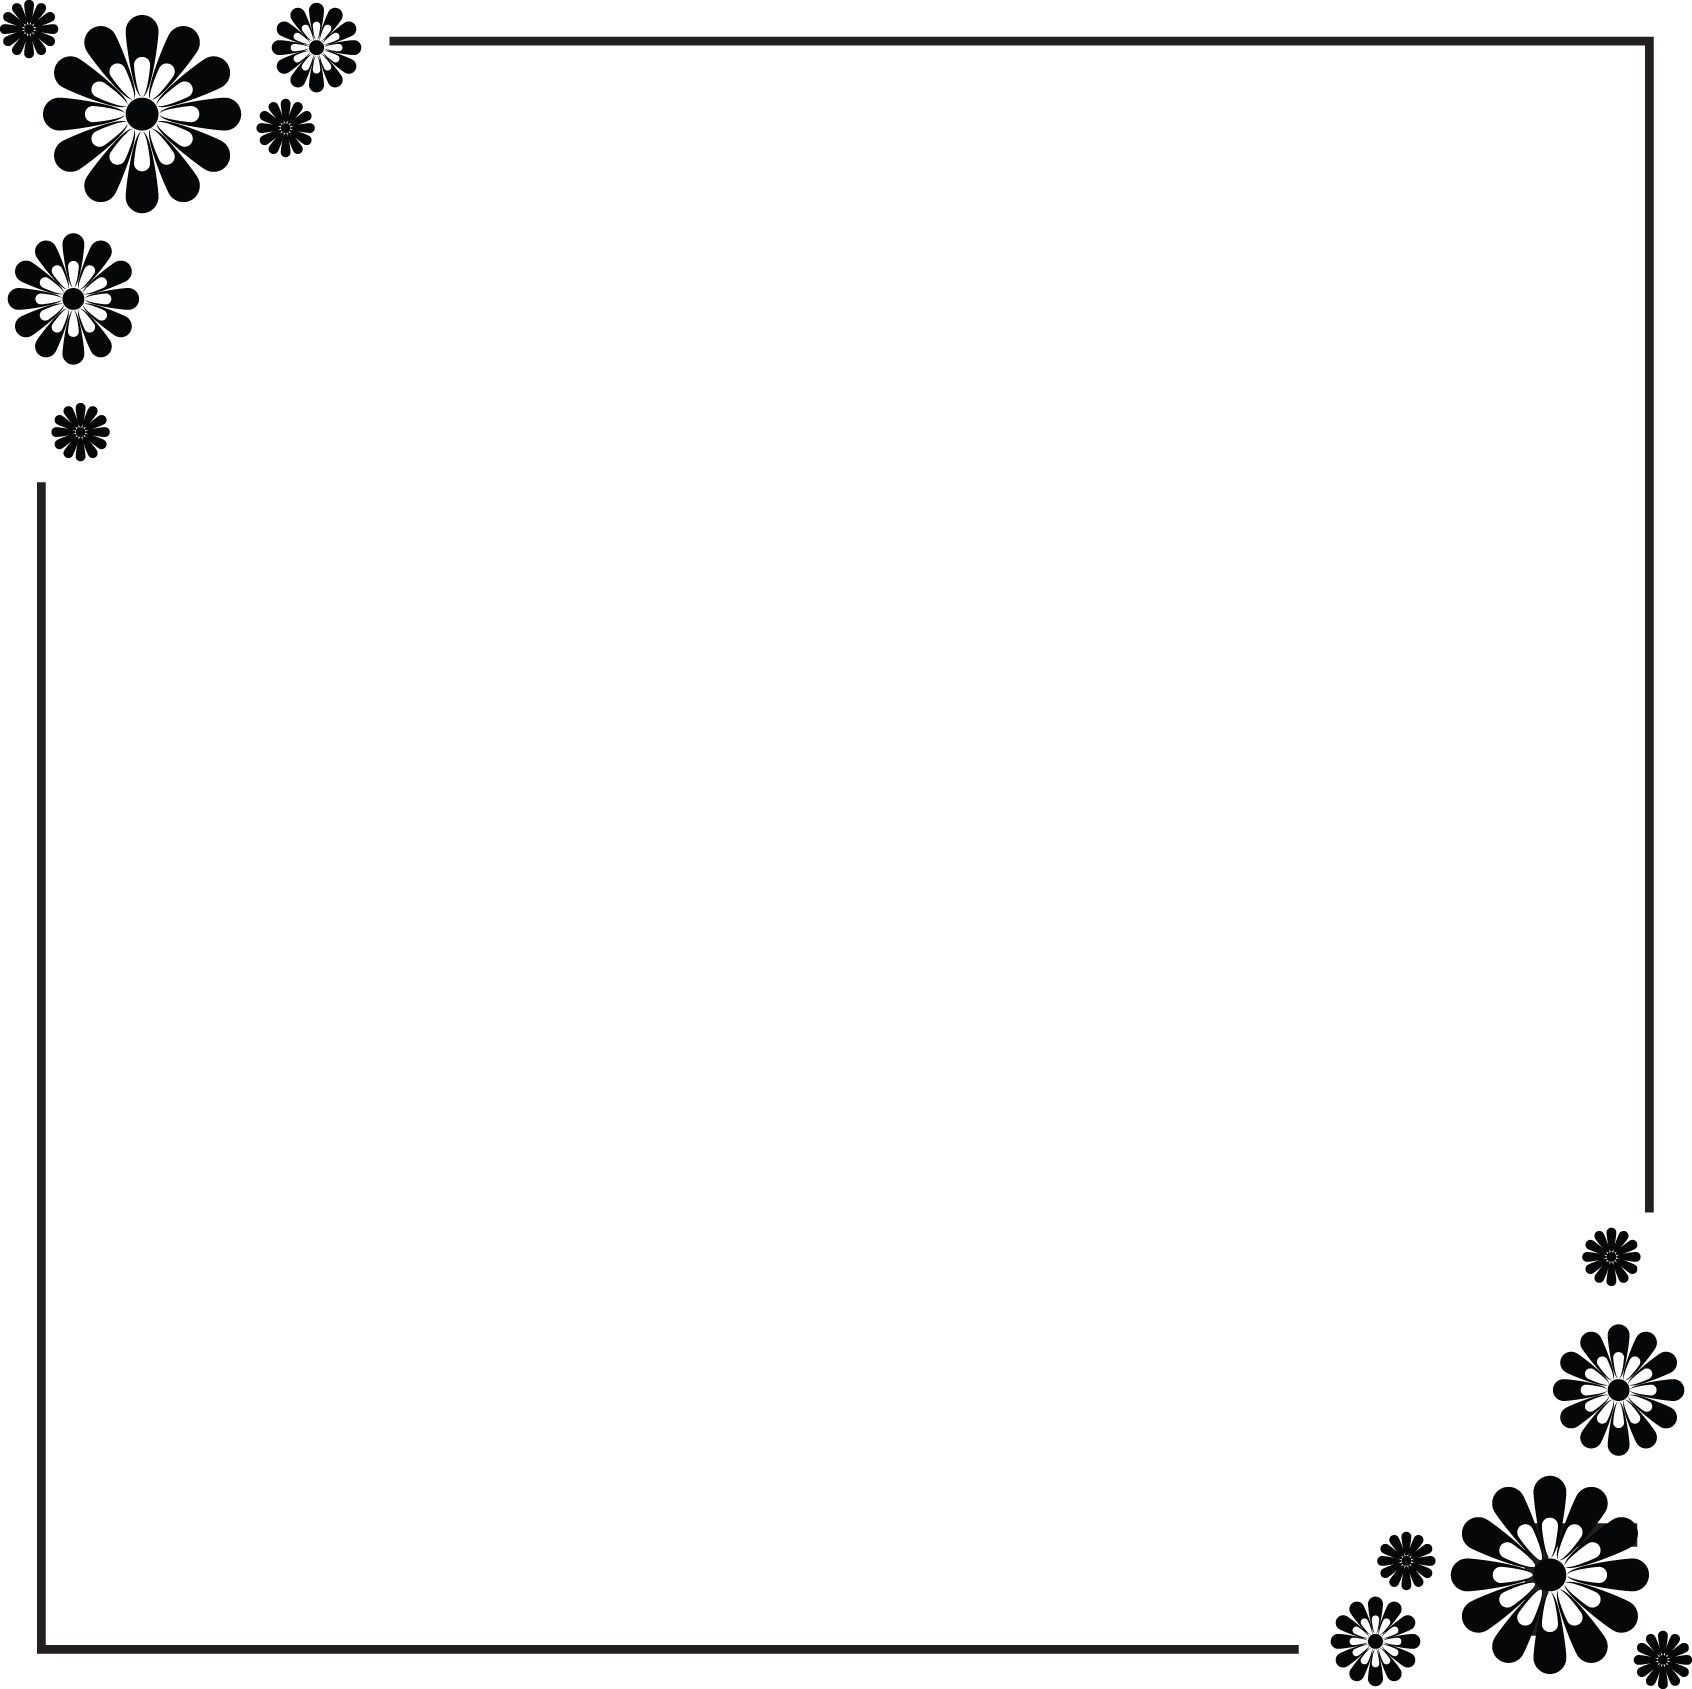 Simple Border Designs For A4 Paper Clipart Best,Small Backyard Dog Friendly Landscape Design Pictures